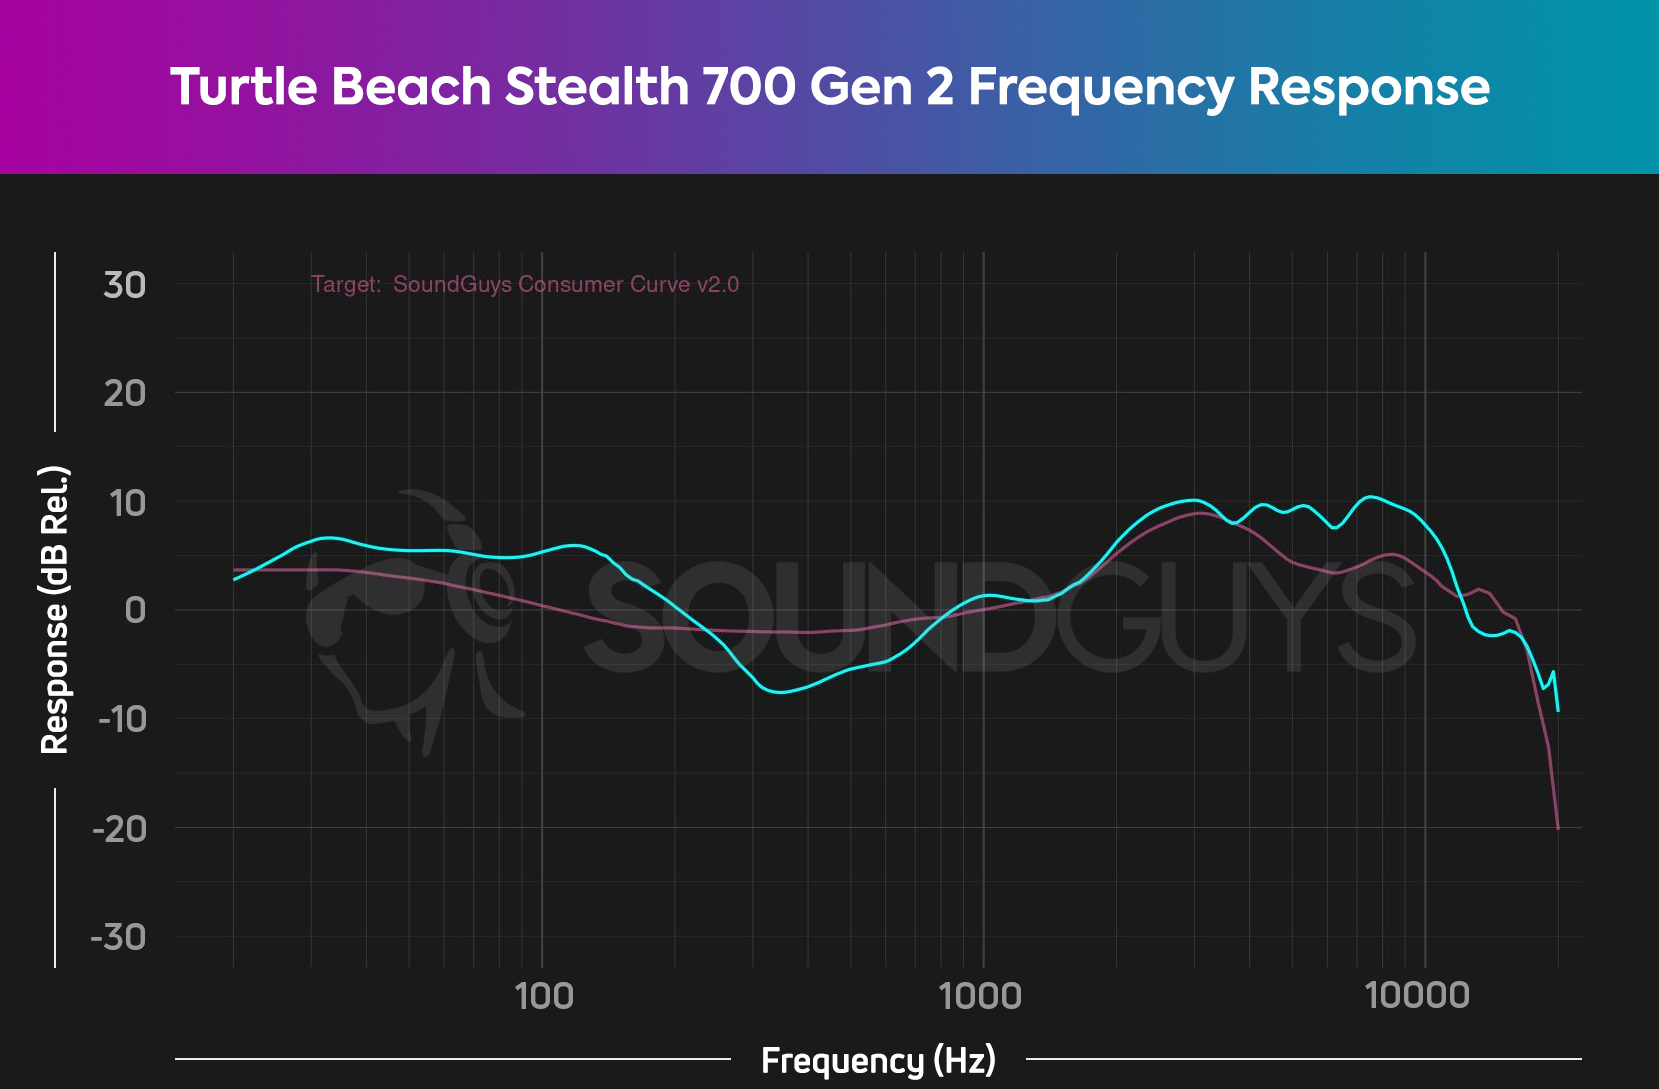 Chart of Turtle Beach Stealth 700 Gen 2 frequency response compared to house chart.